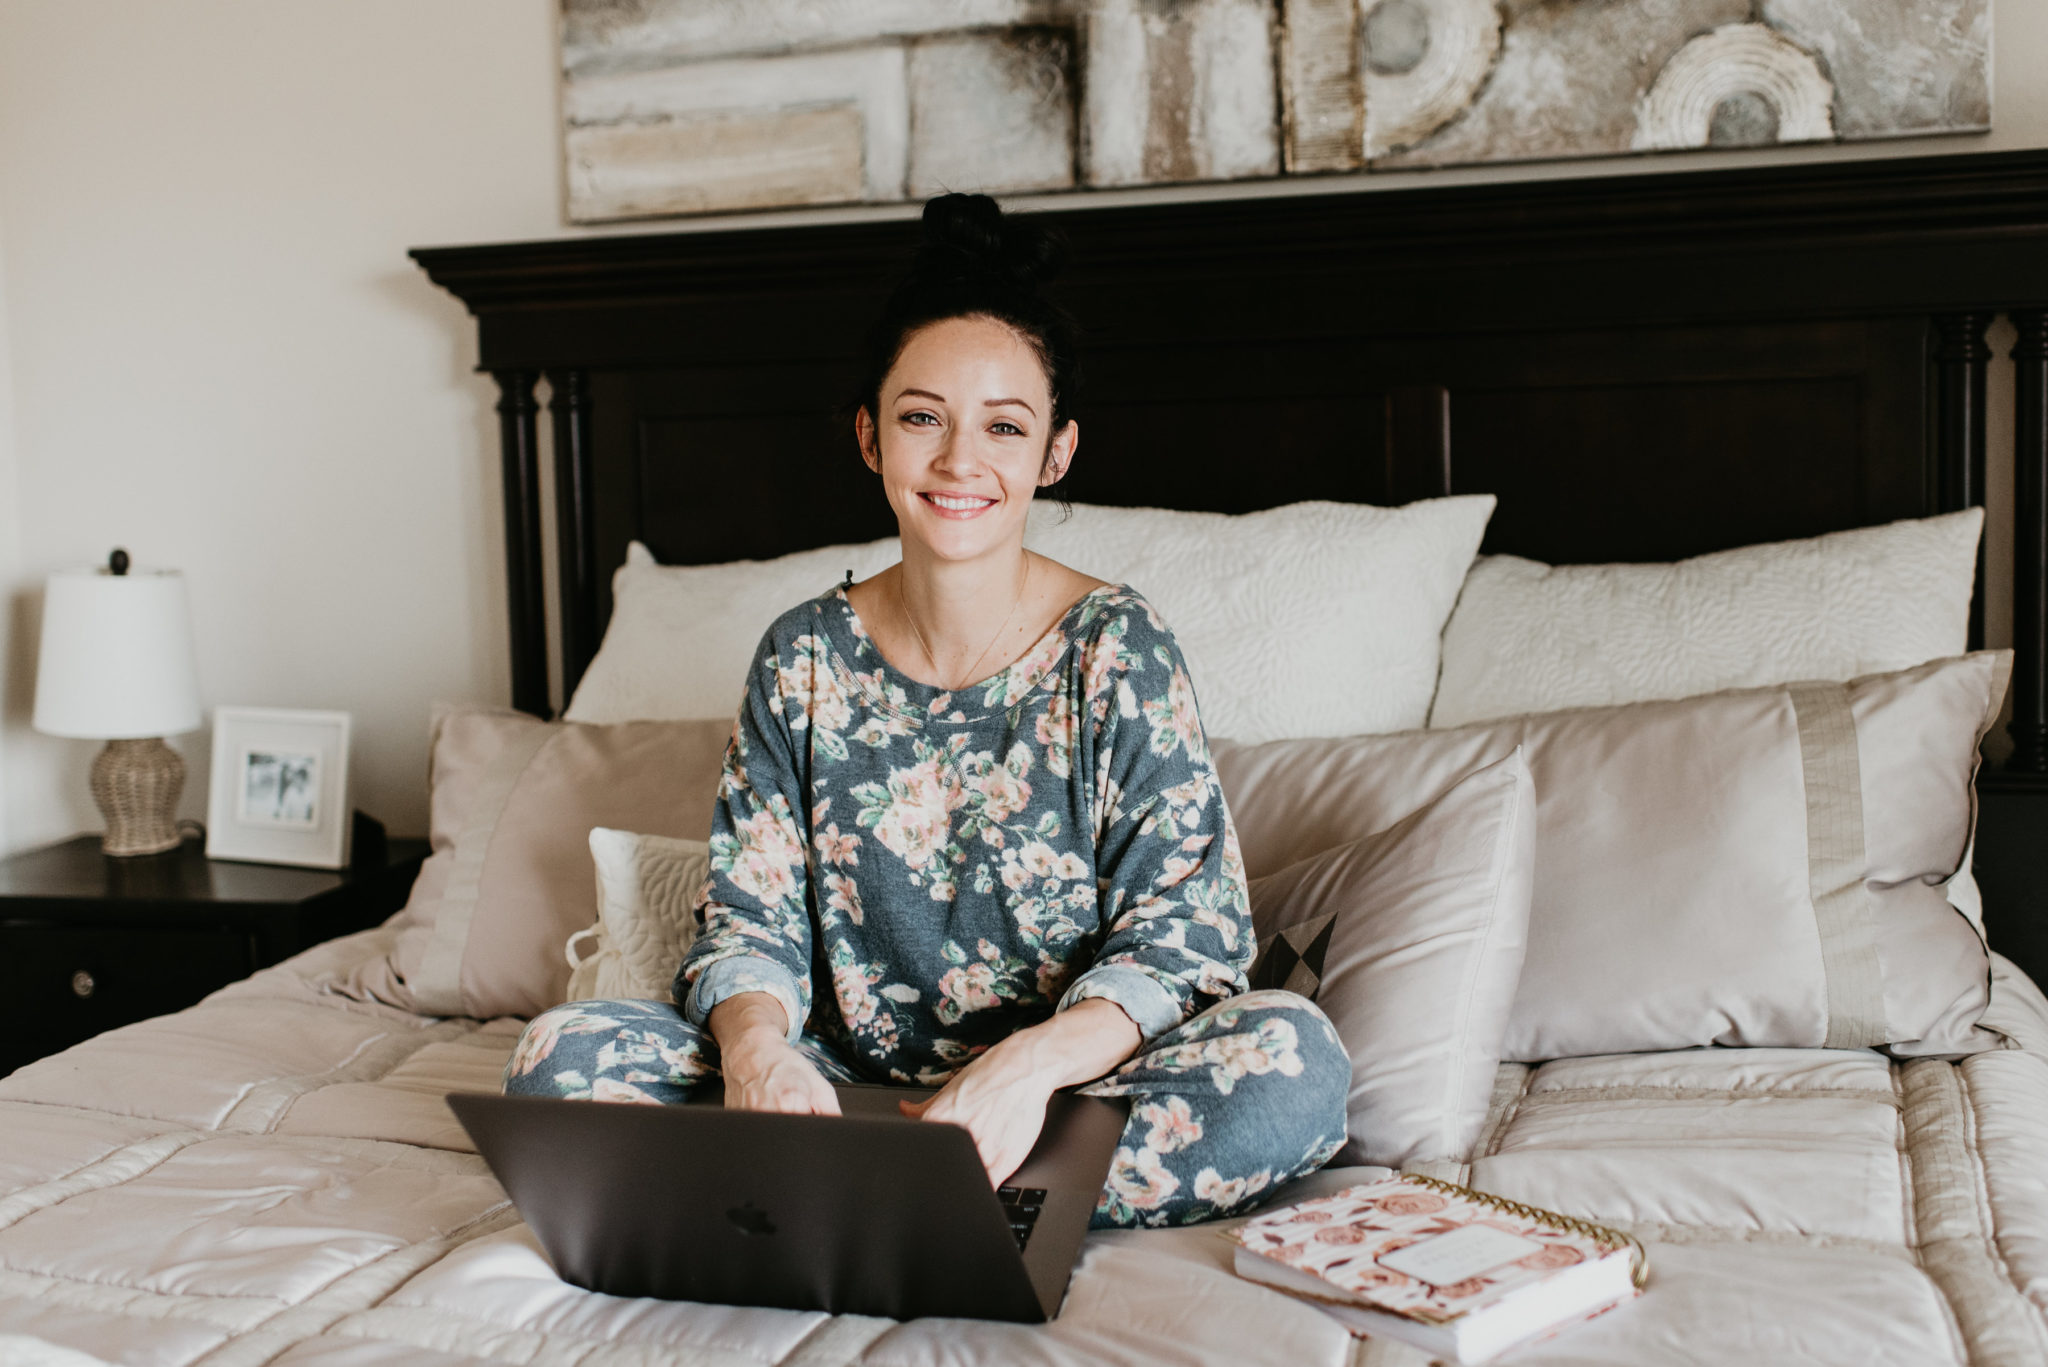 5 Planner Organization Tips for a Successful Year by popular Las Vegas lifestyle blogger Outfits & Outings: image of a woman working on her laptop and looking at her Day Designer planners